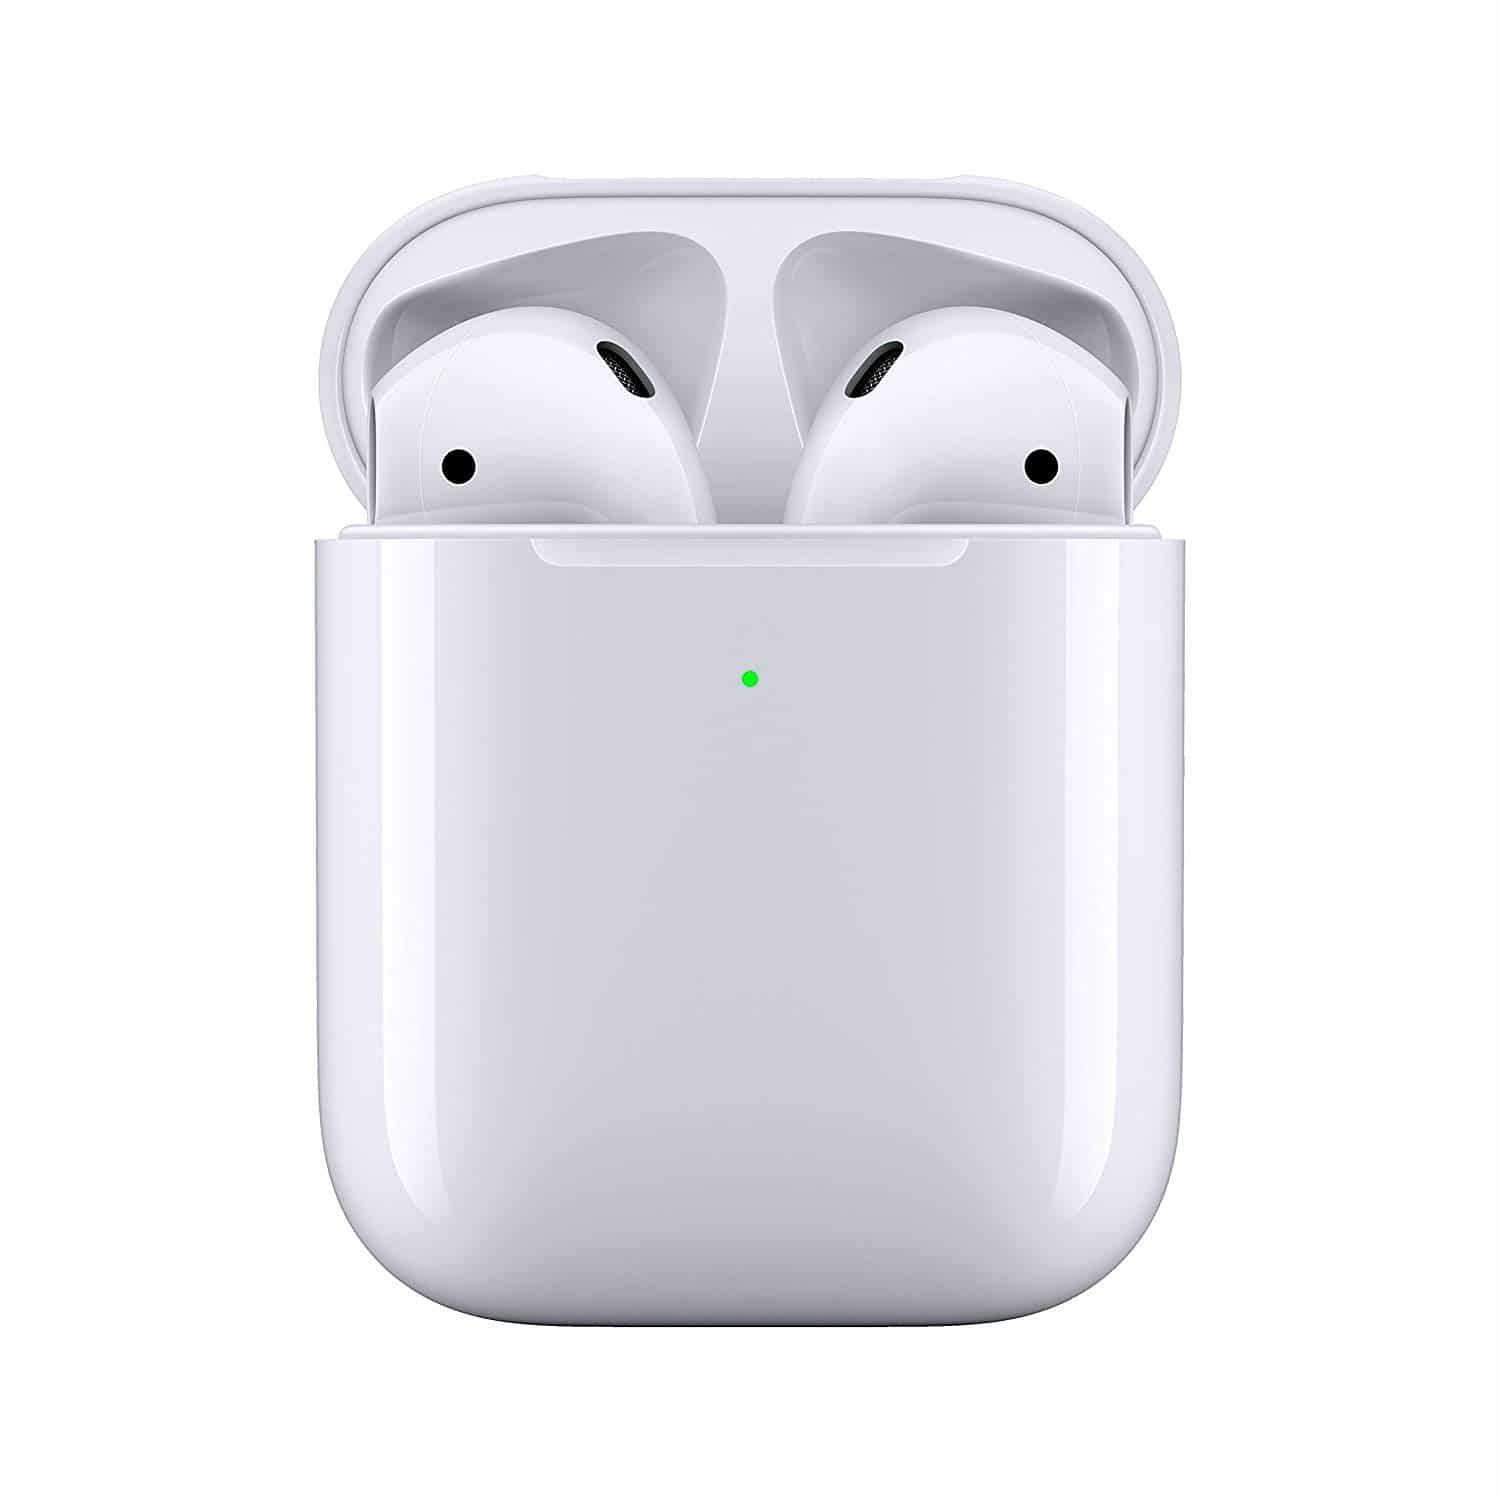  Apple AirPods 2 A Complete Review WirelessEarbuds Best